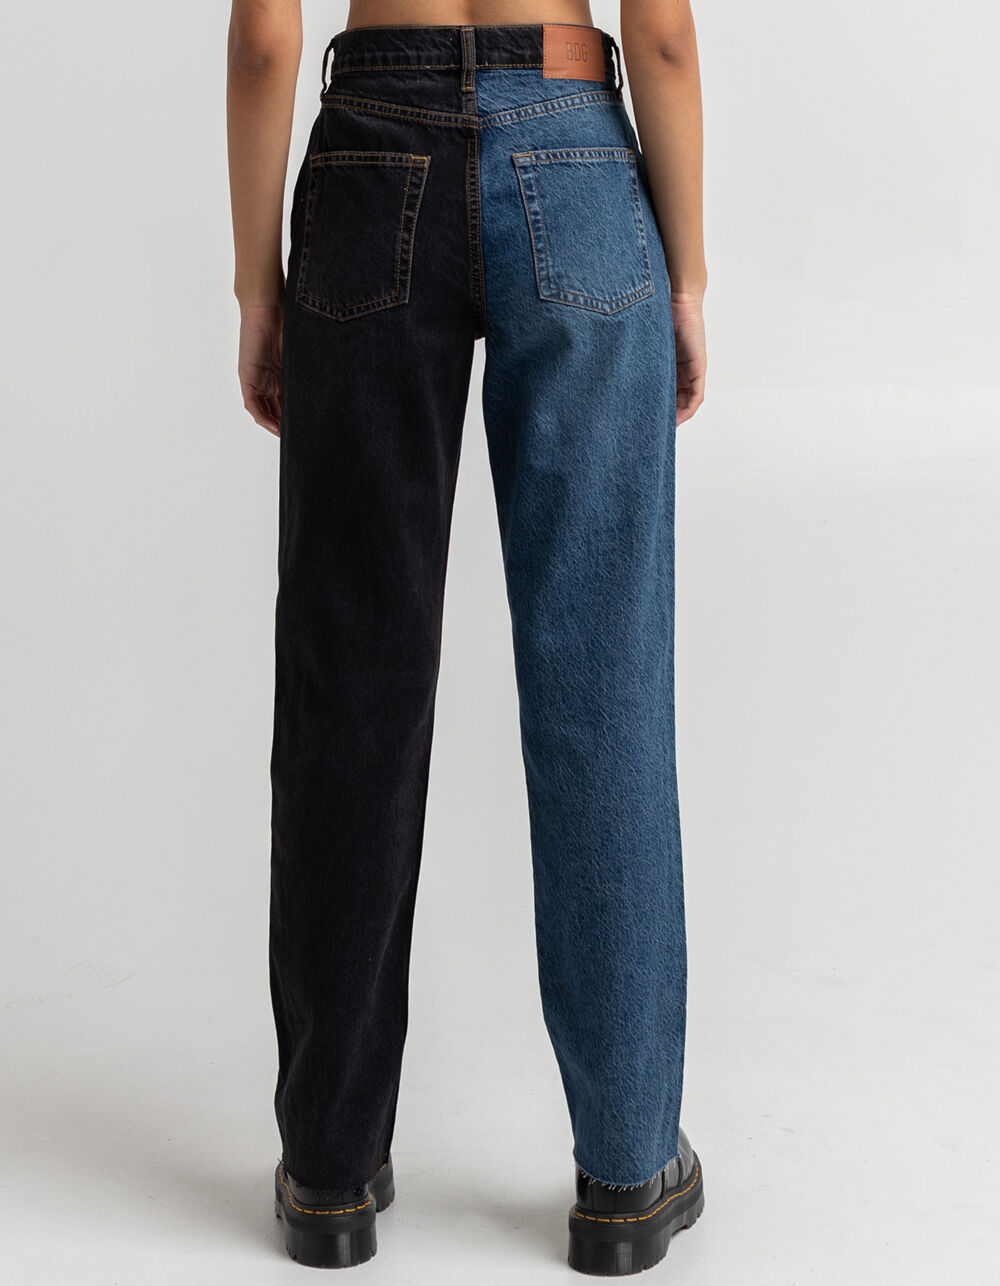 BDG Urban Outfitters Pax Two Tone Womens Jeans - DARK WASH | Tillys